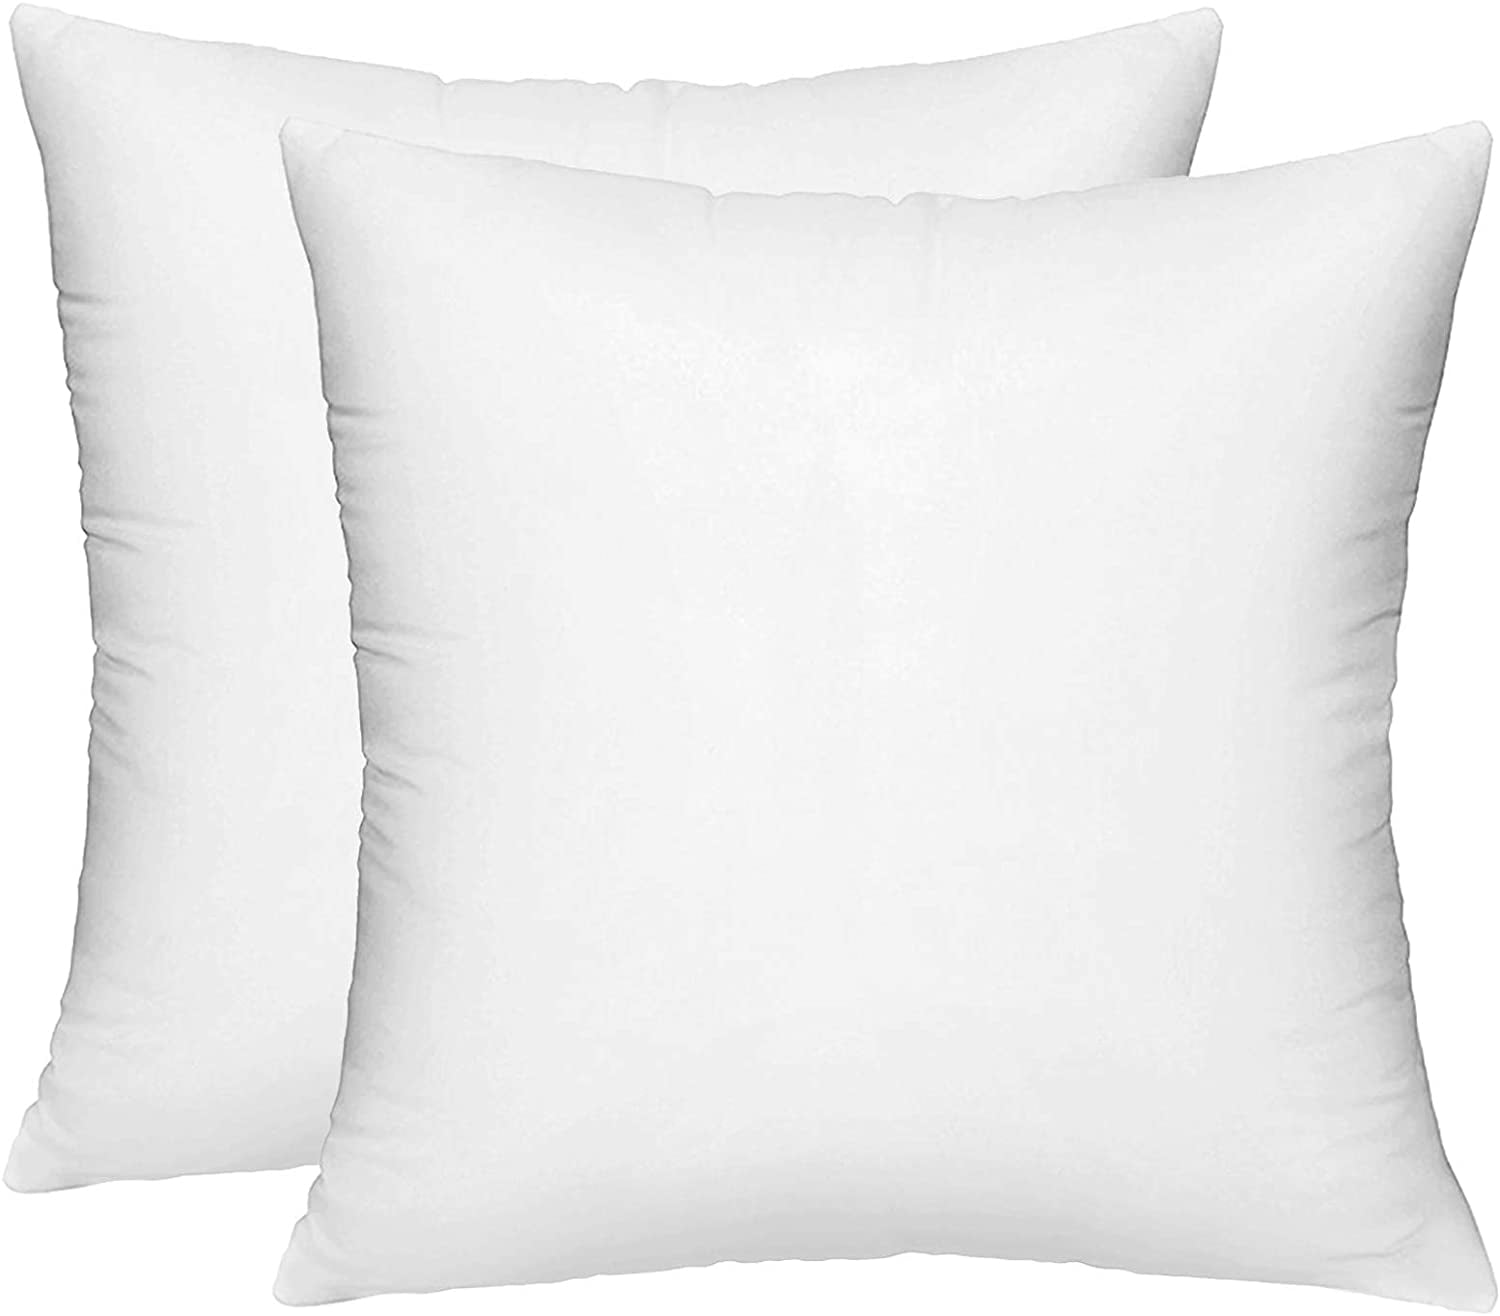 Pack of 2, White Utopia Bedding Throw Pillows Insert - 12 x 12 Inches Bed and Couch Pillows Indoor Decorative Pillows